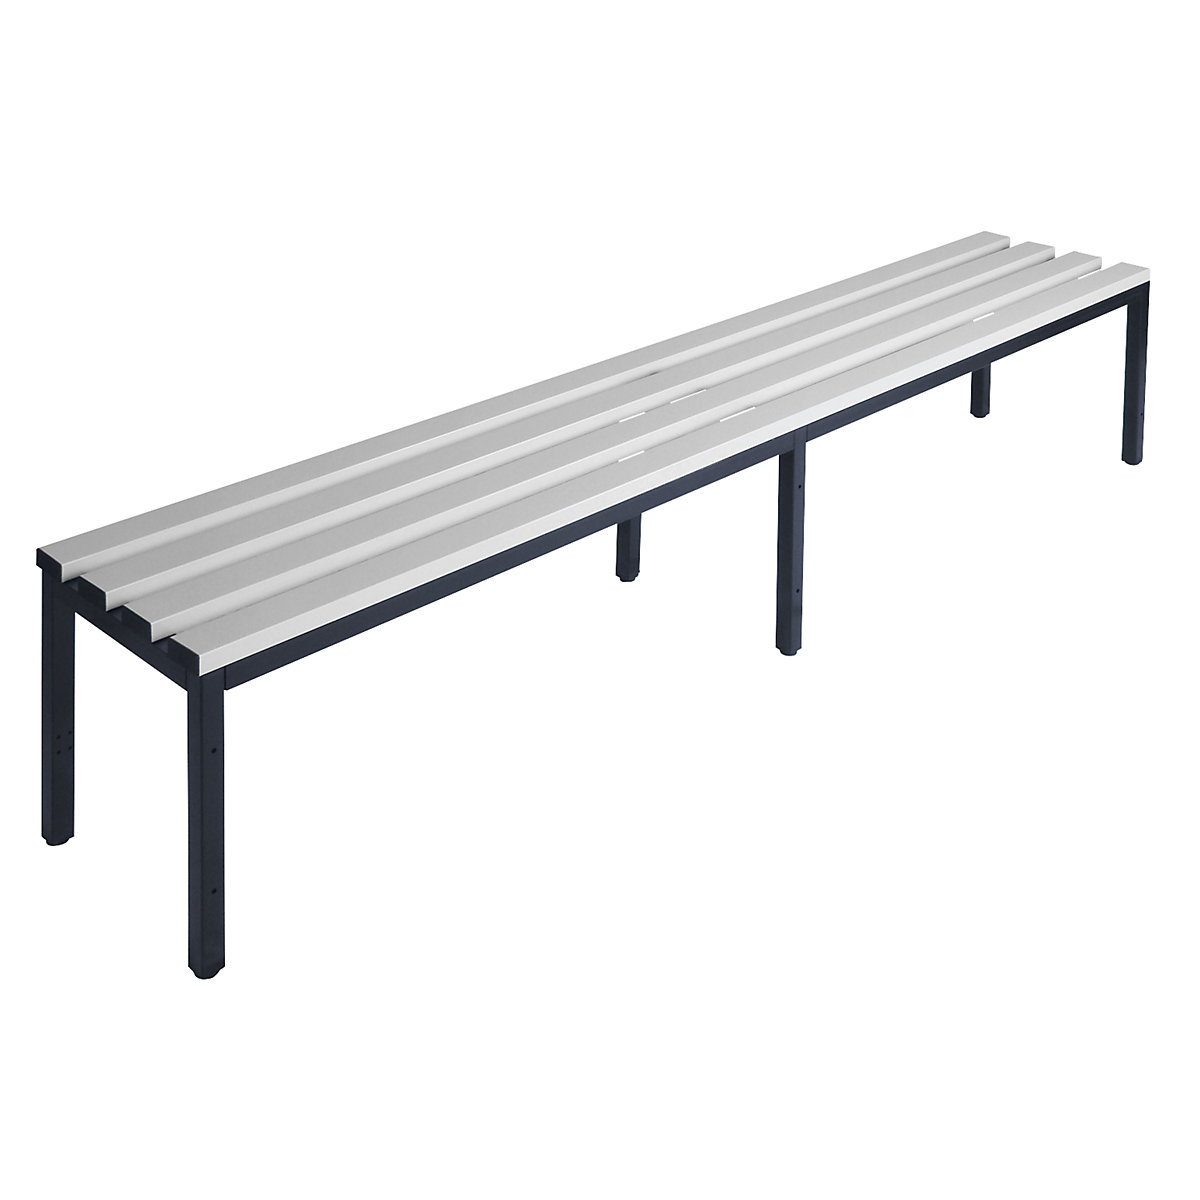 Wolf – Cloakroom bench without back rest, PVC slats, grey, length 2000 mm